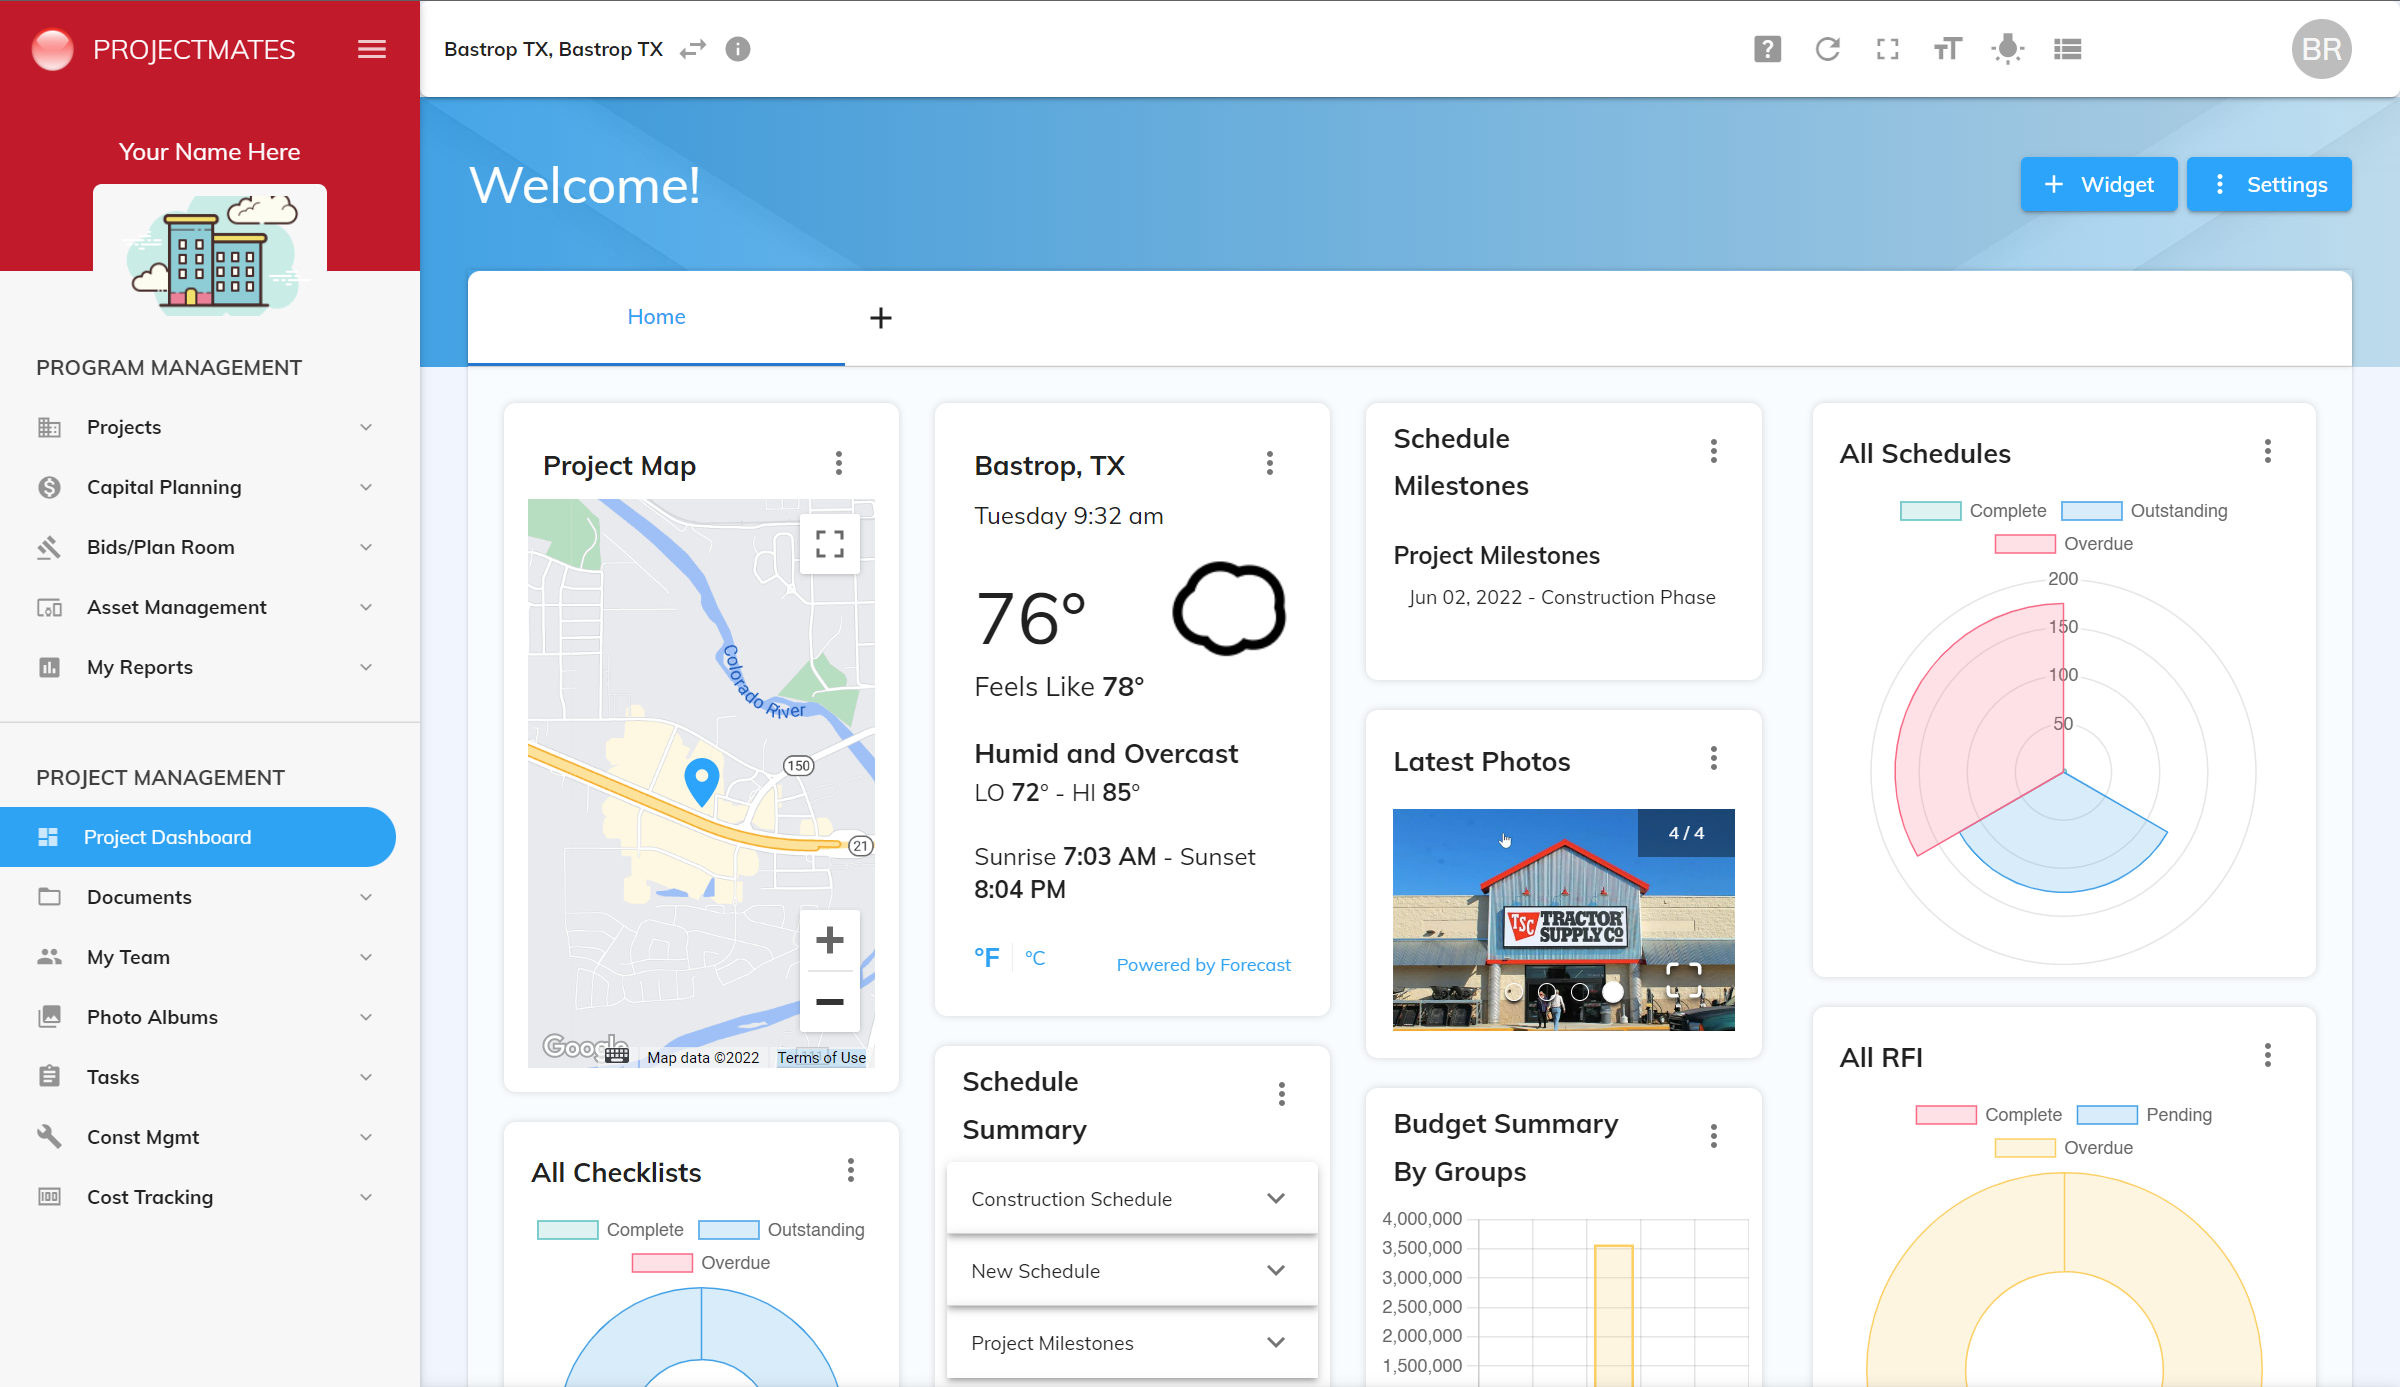 Get real-time information in dashboards so you get the information you need at a glance.